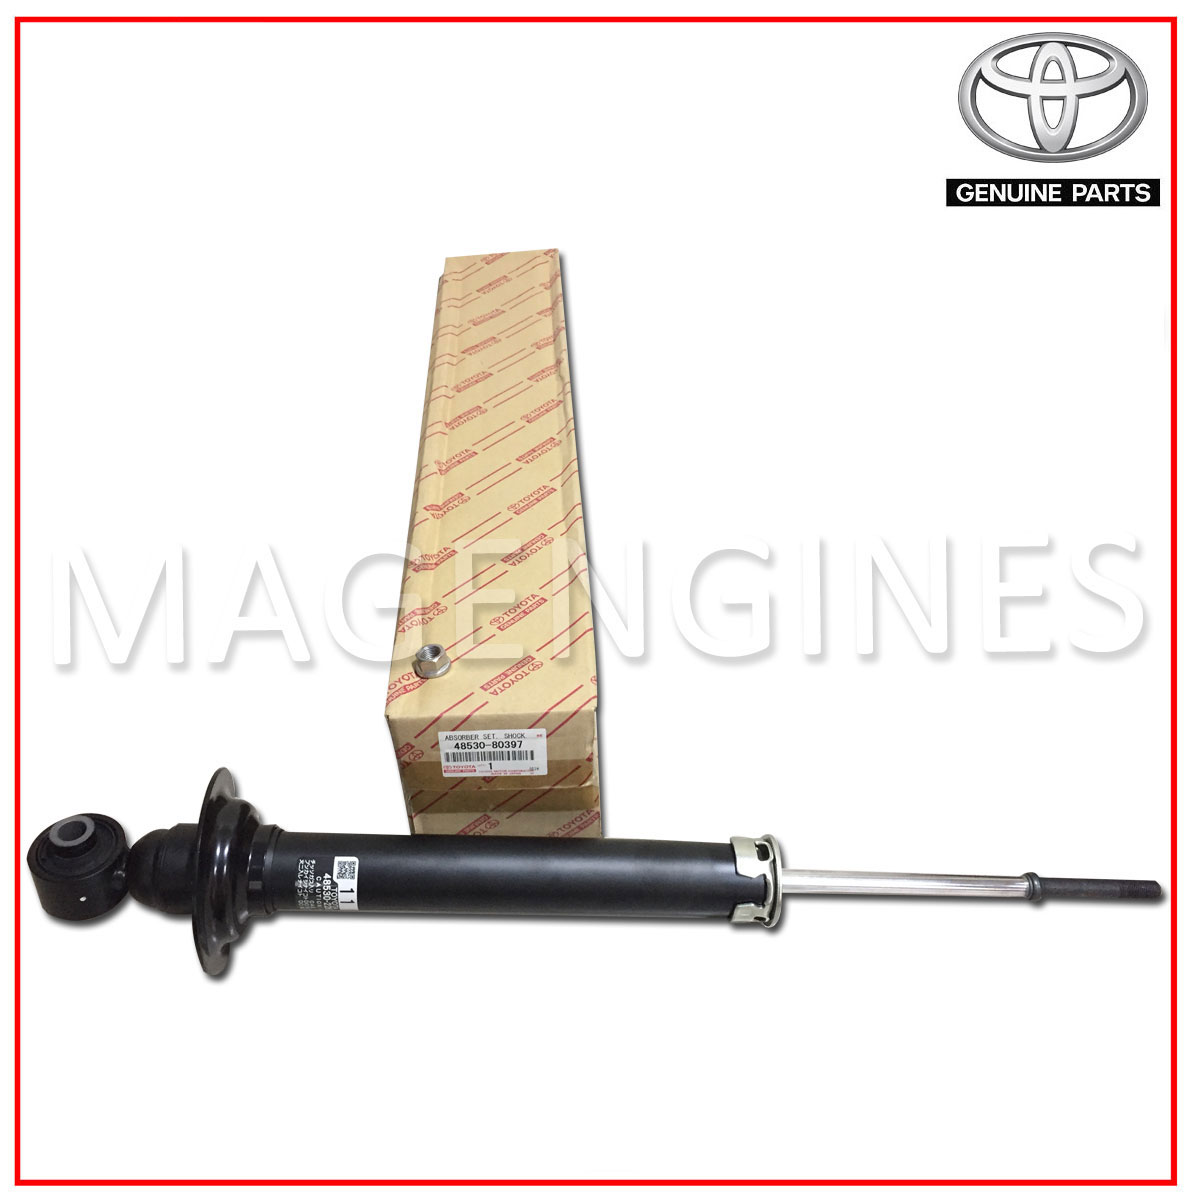 Genuine Toyota 48530-69145 Shock Absorber Assembly 